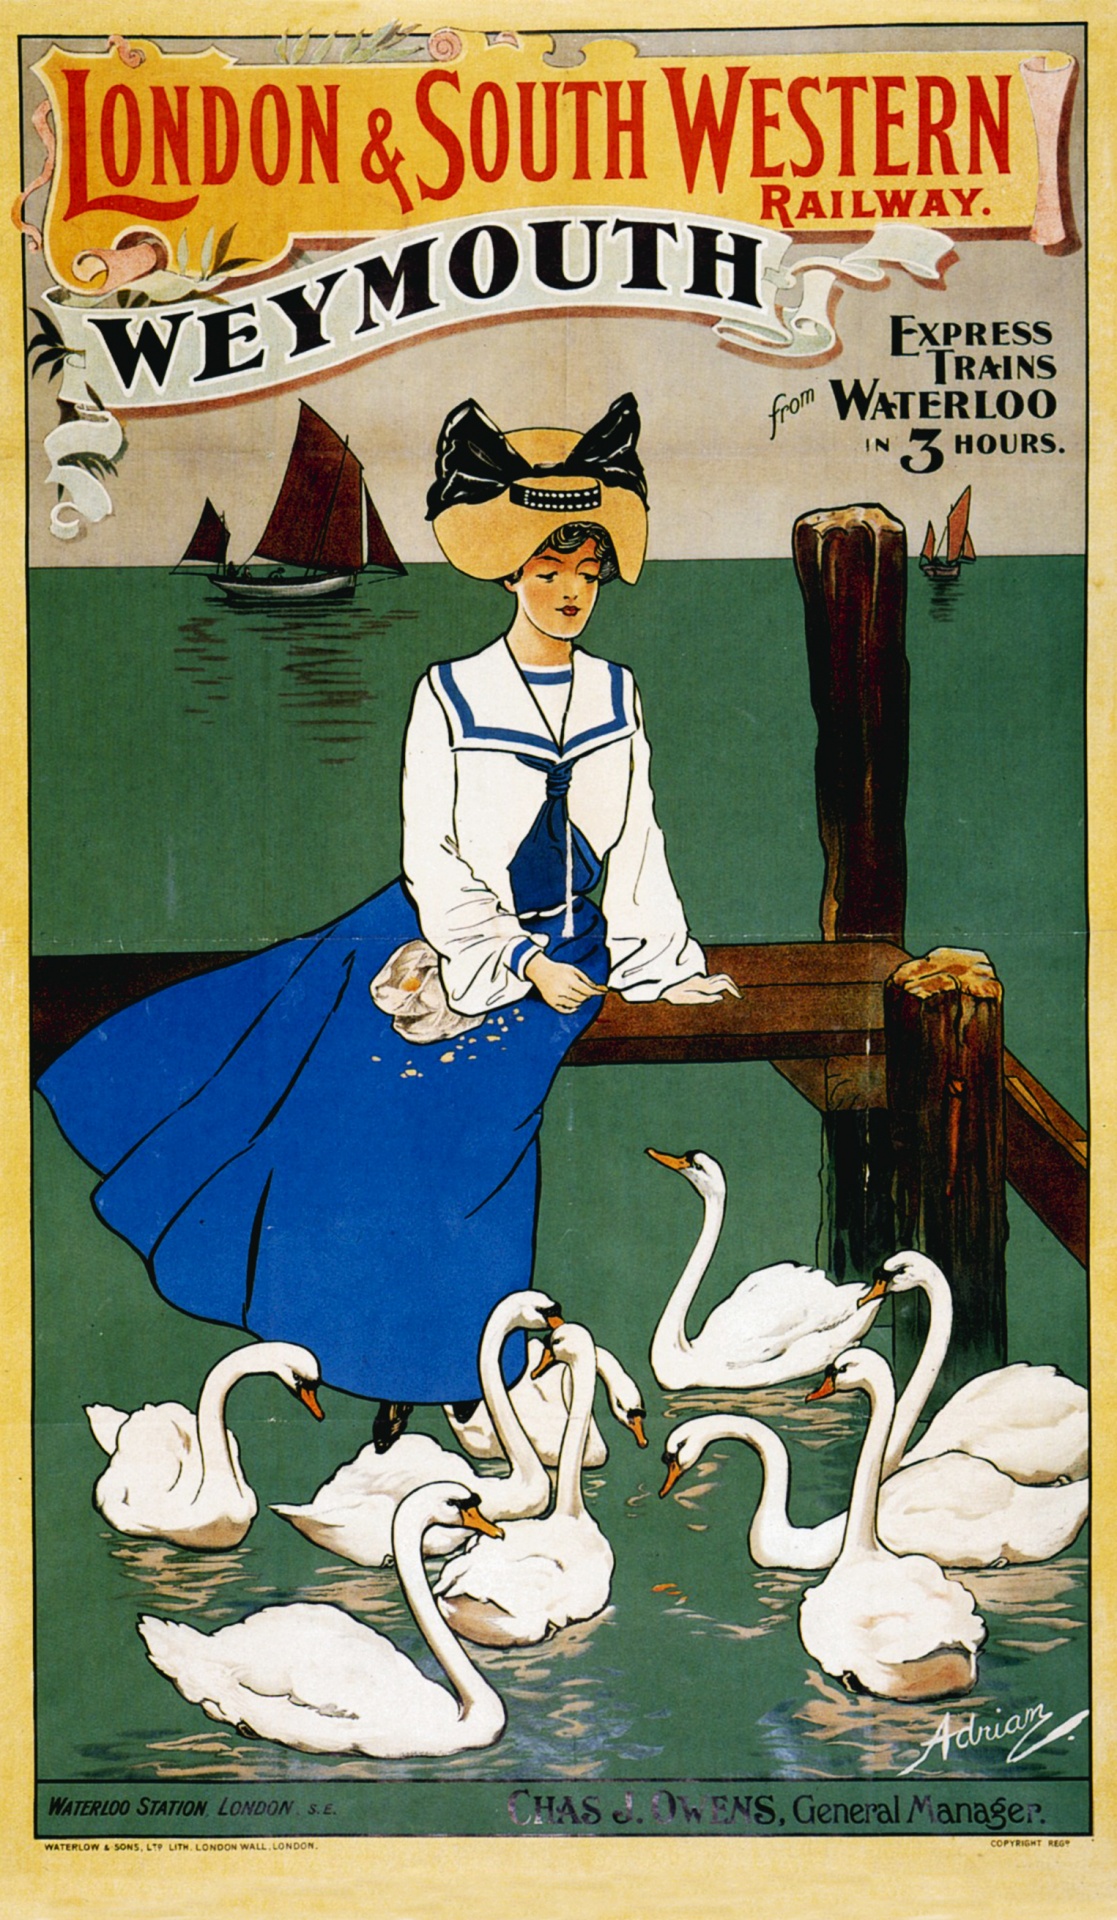 Weymouth Train Travel Poster